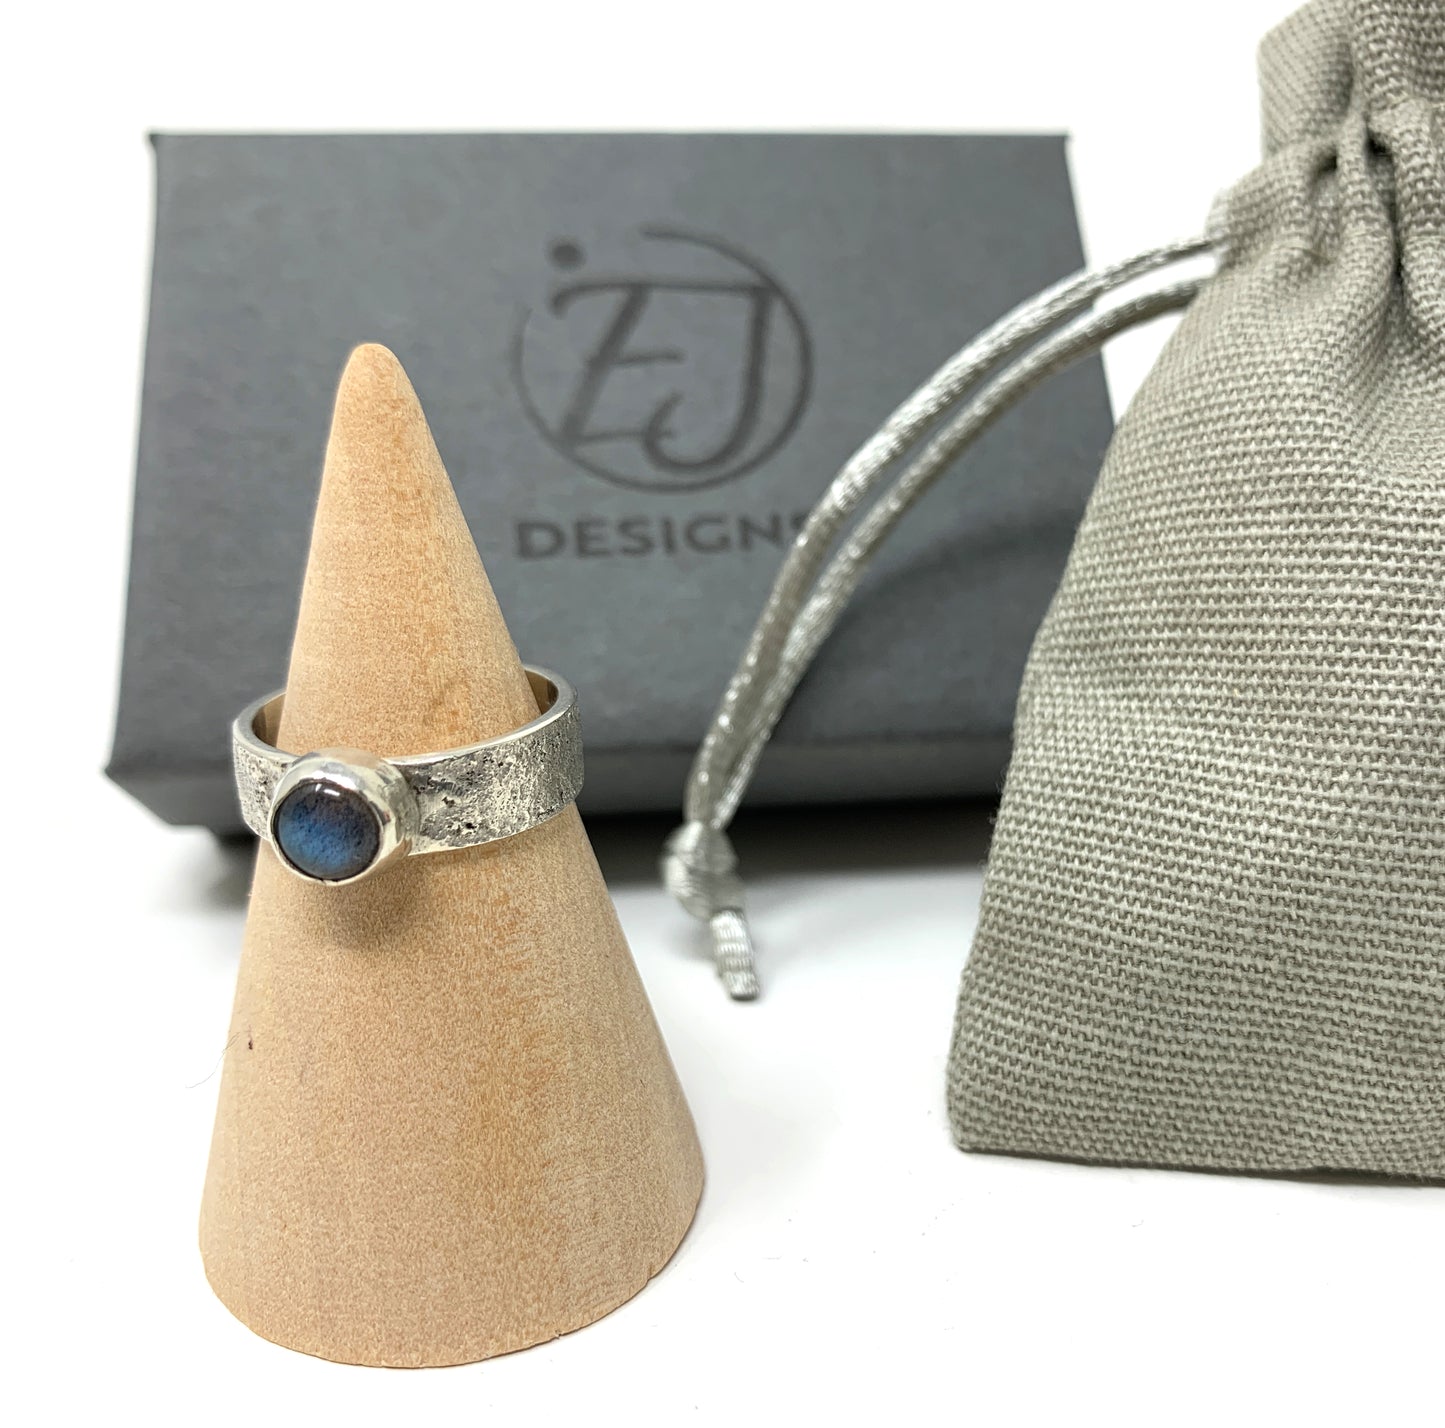 Chunky Silver Ring with Stone by Elizabeth James Designs